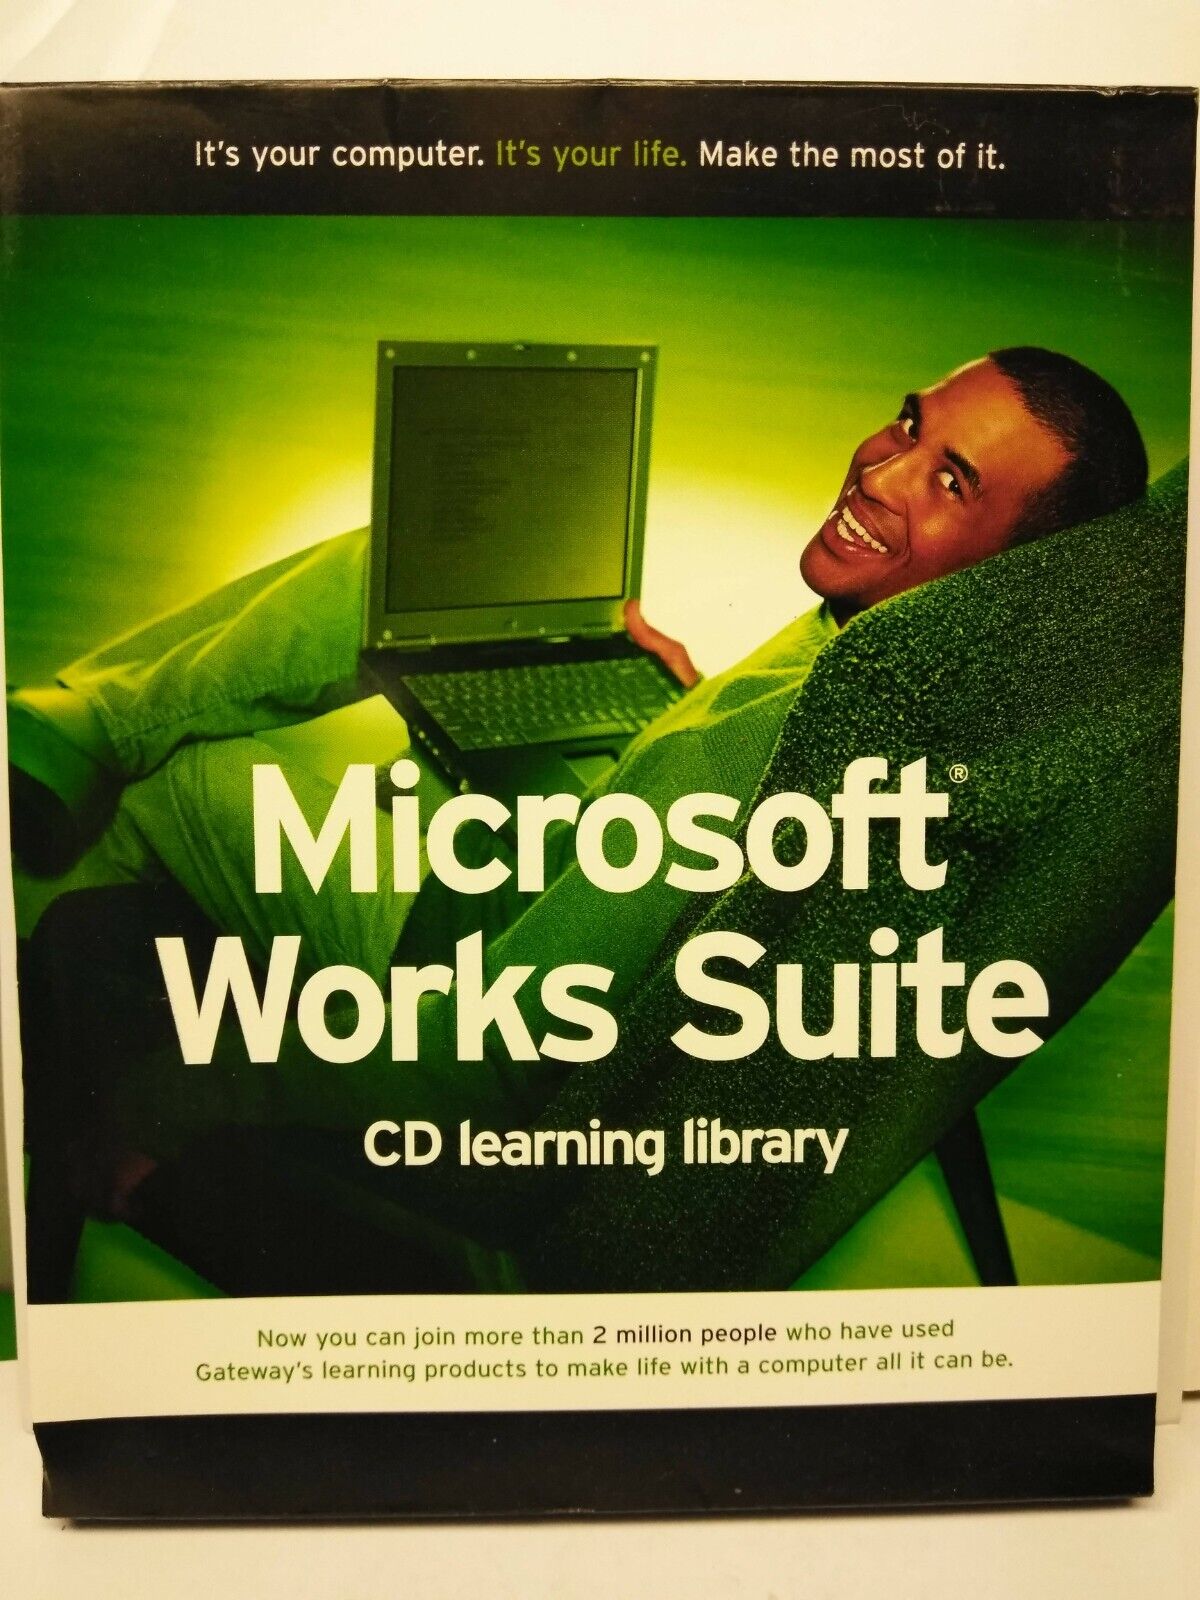 RARE NEW NOS Microsoft Works Suite 2003 CD LEARNING LIBRARY by Gateway Learning